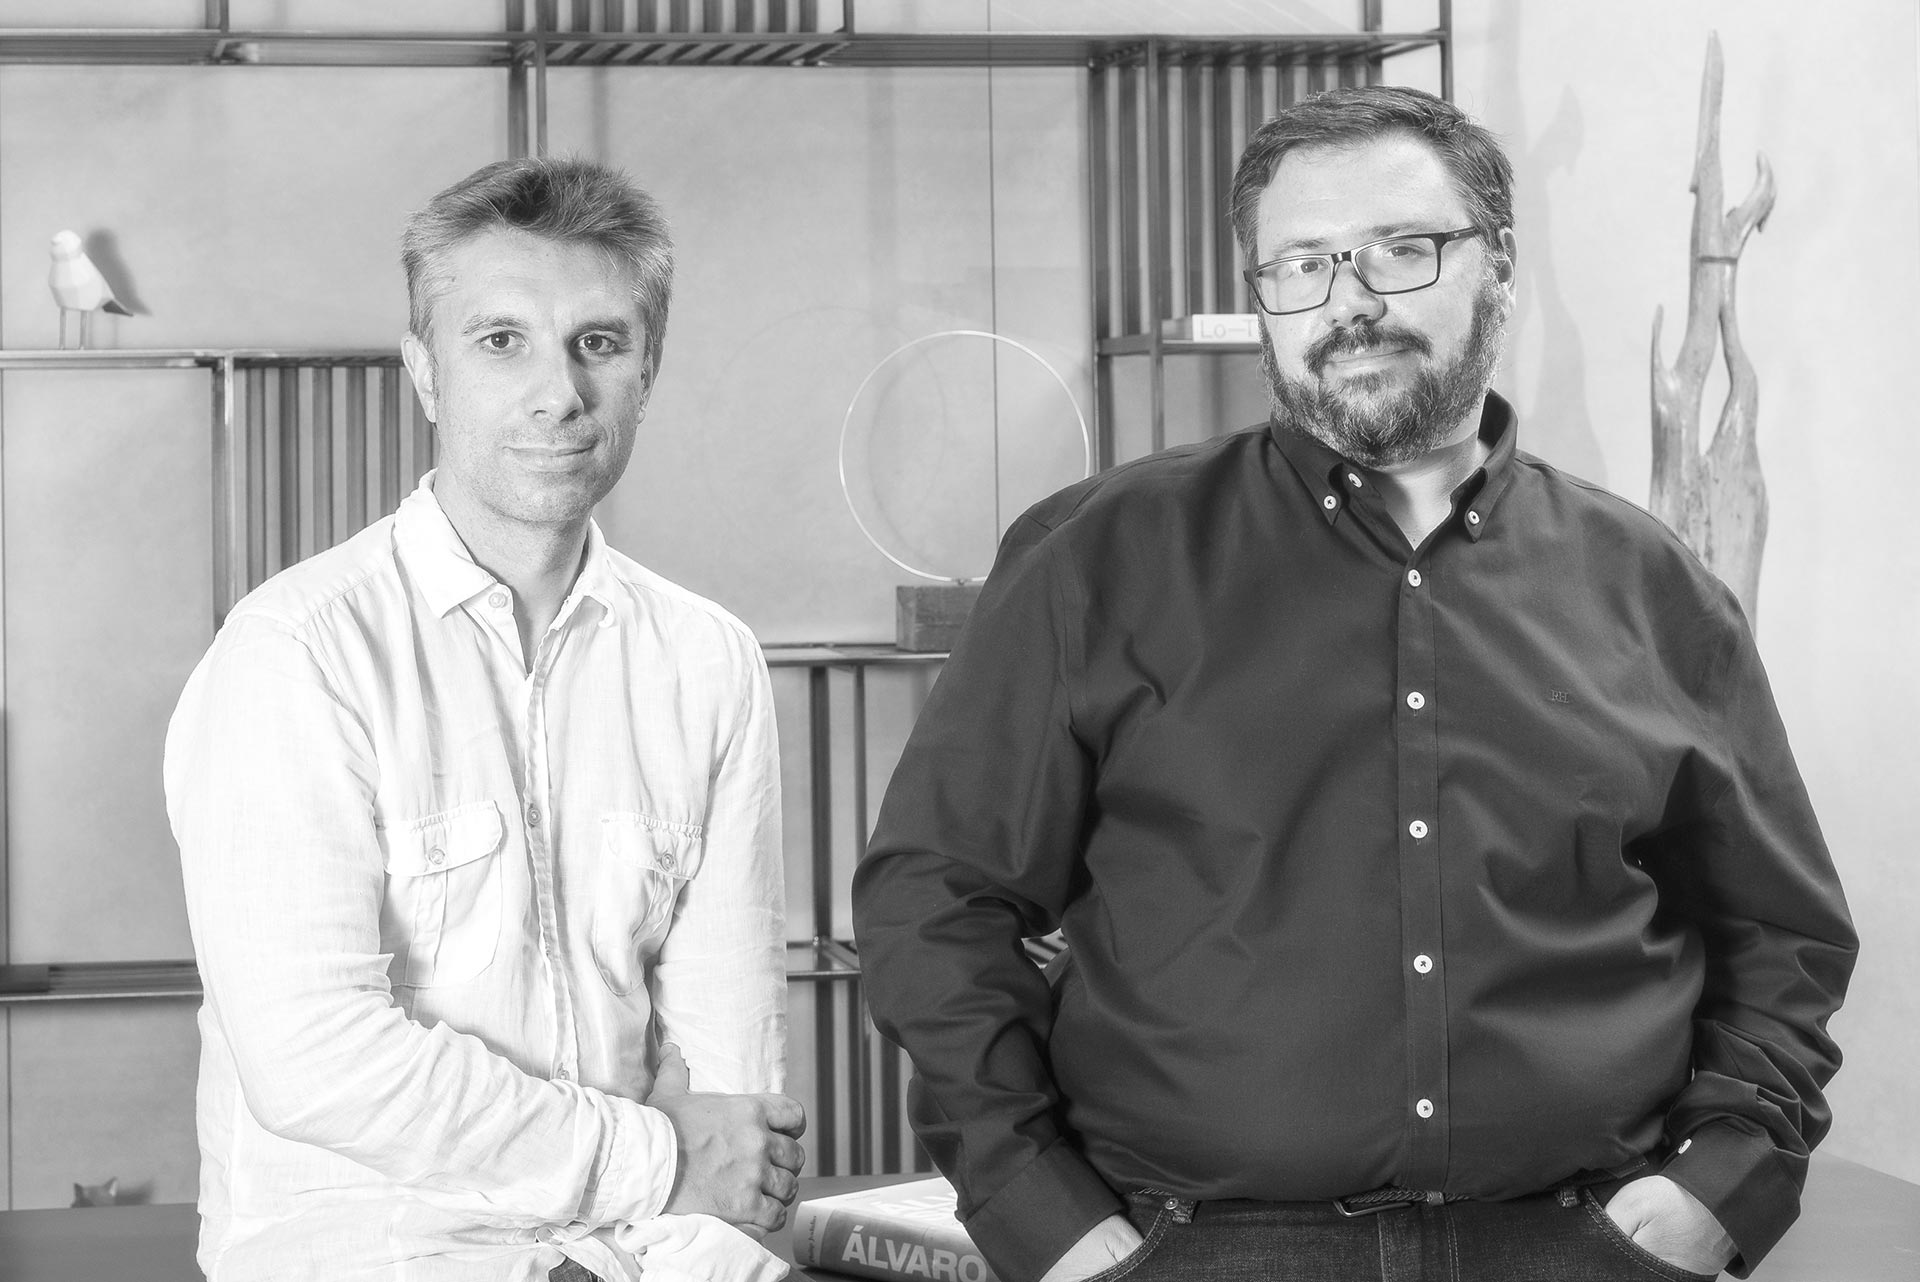 Tomás Fernández and Luis Sánchez Blasco: ‘We always try to incorporate natural materials such as stone in our projects, seeking sustainability and a better relationship with the surroundings’